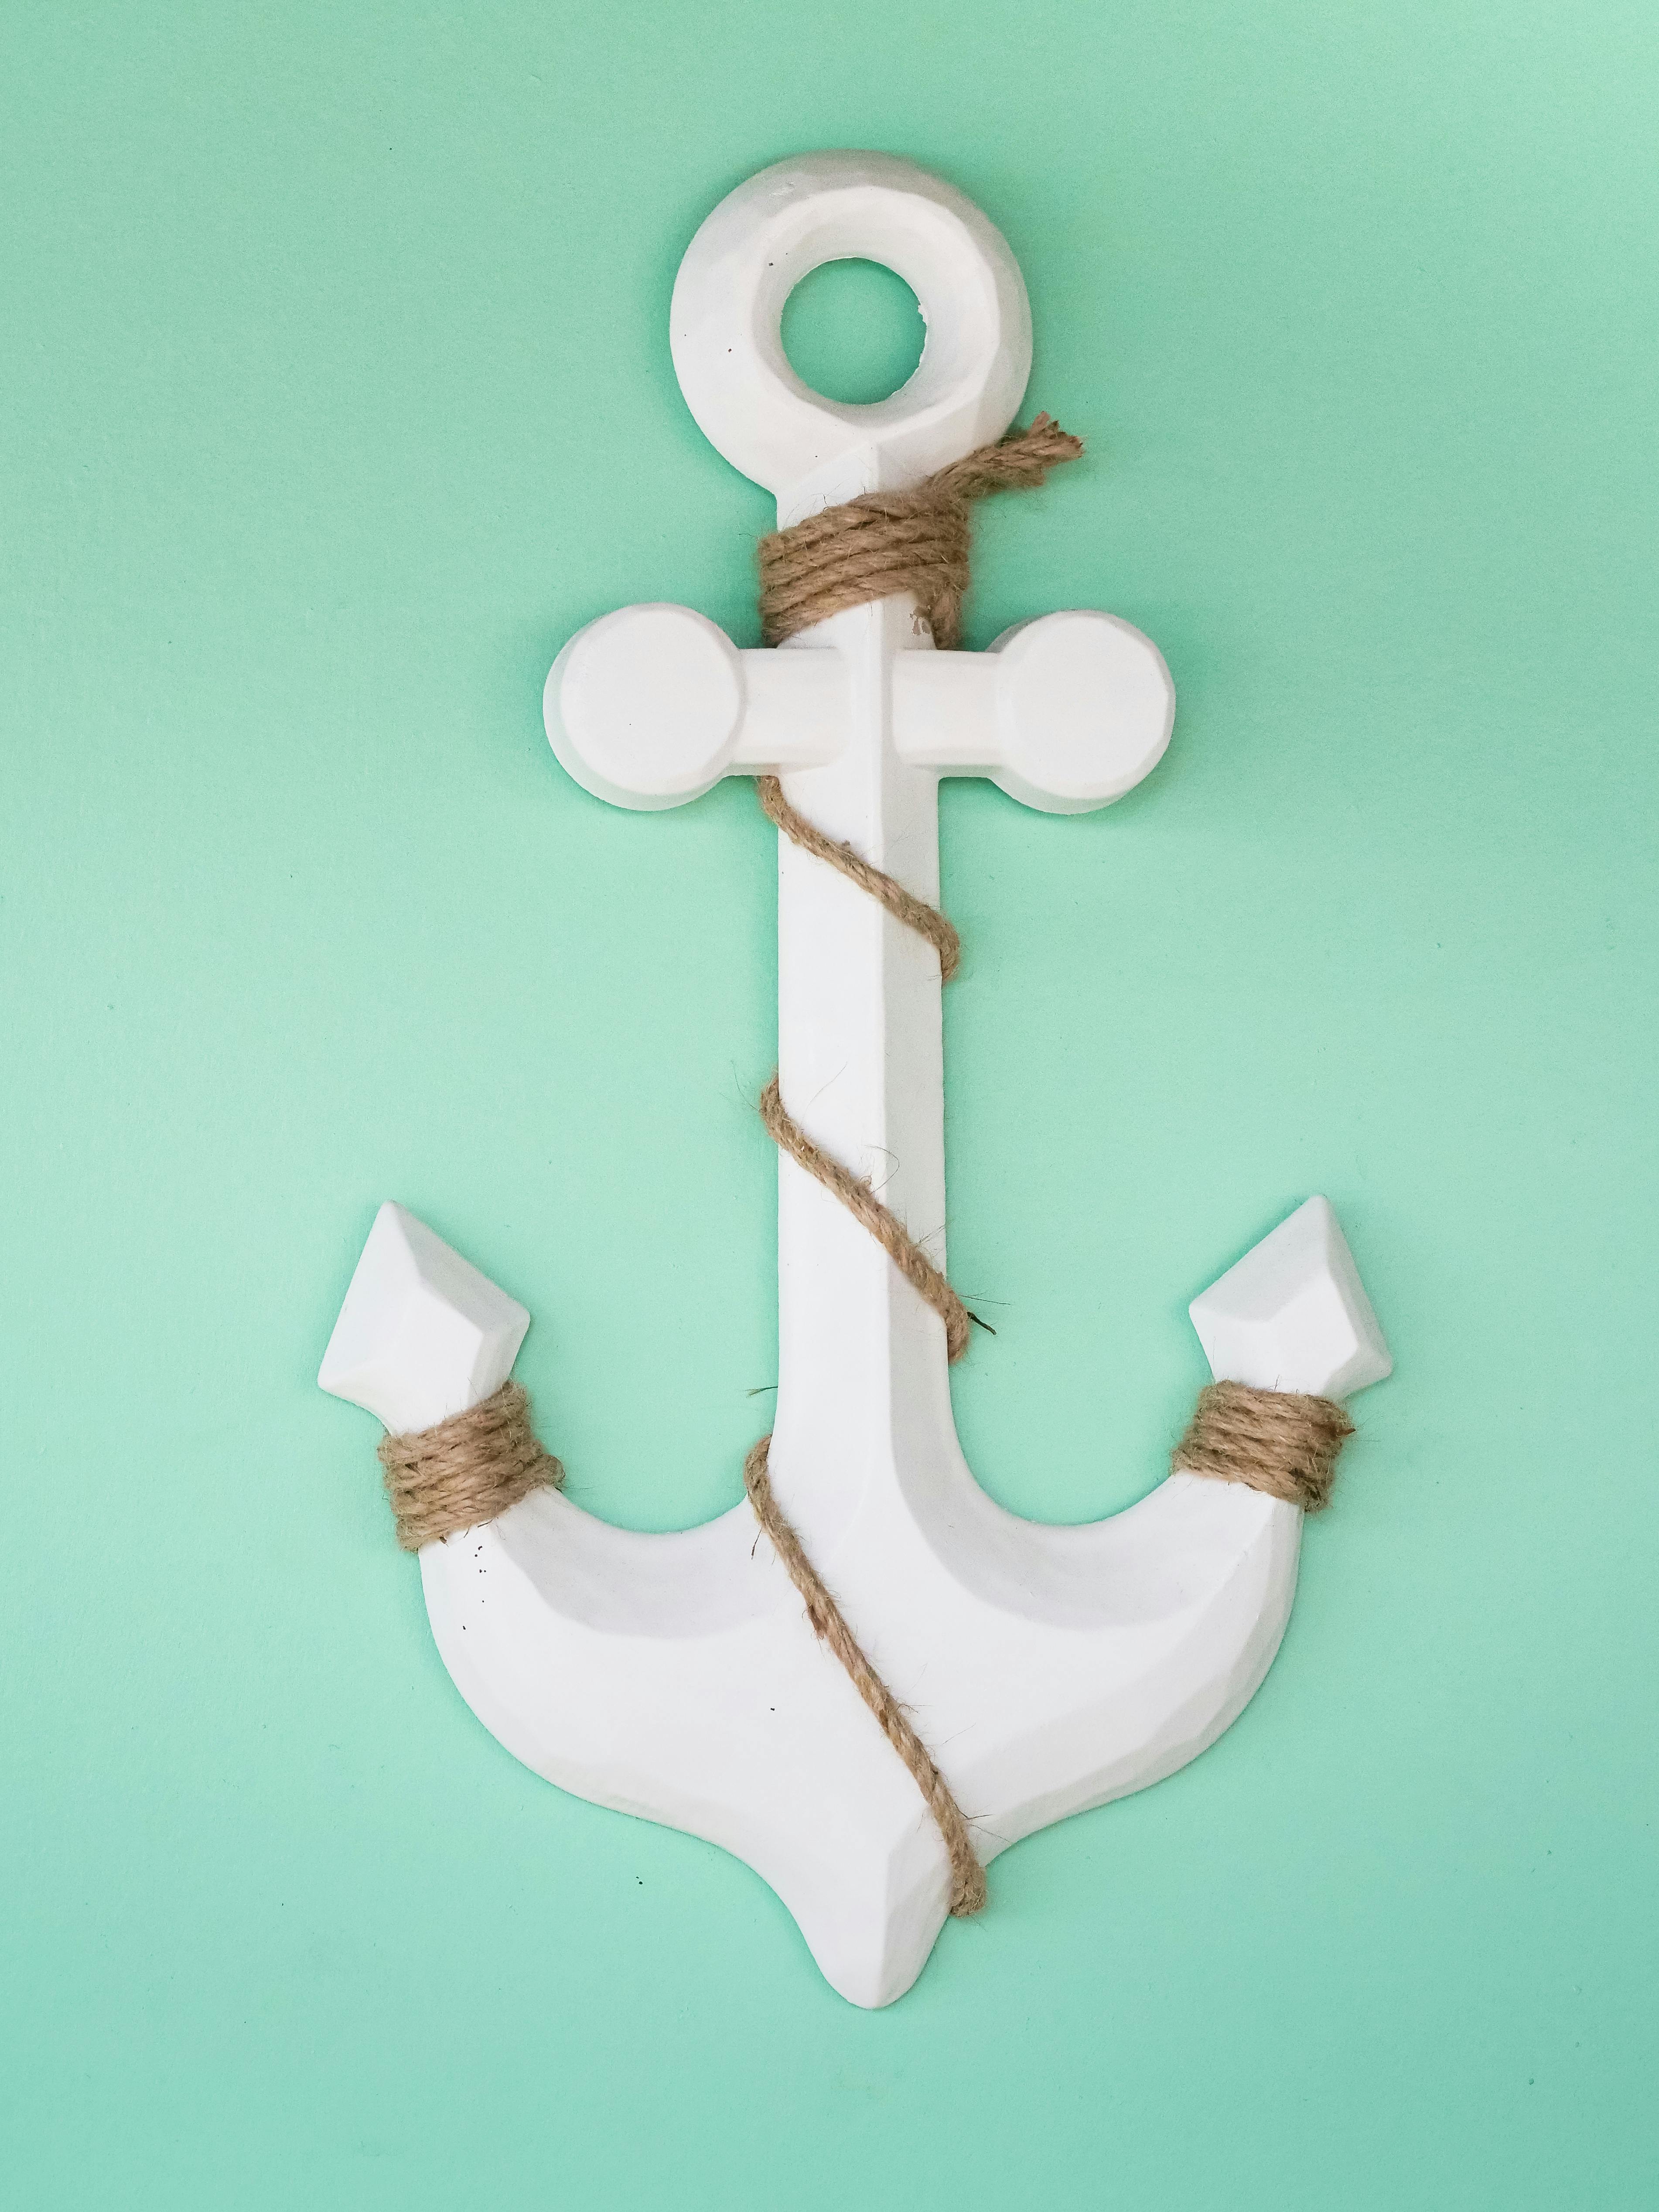 White Wooden Anchor With Rope · Free Stock Photo